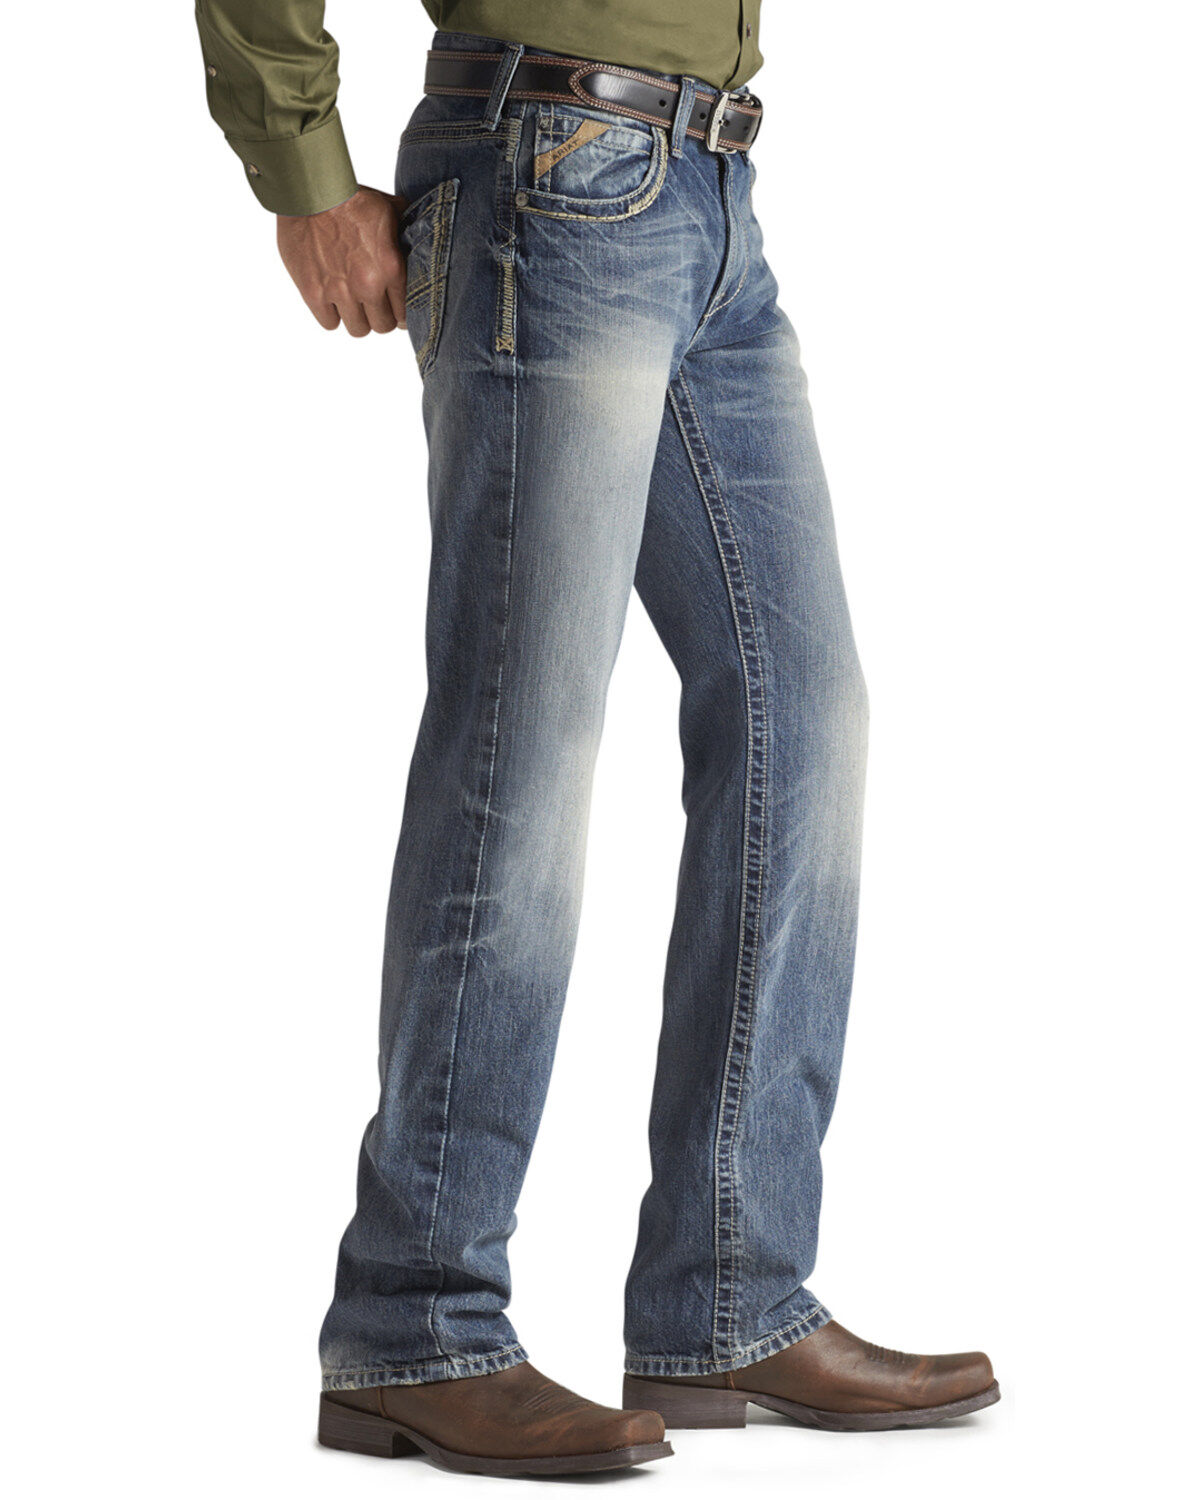 M5 Low Rise Straight Leg Jeans | Boot Barn